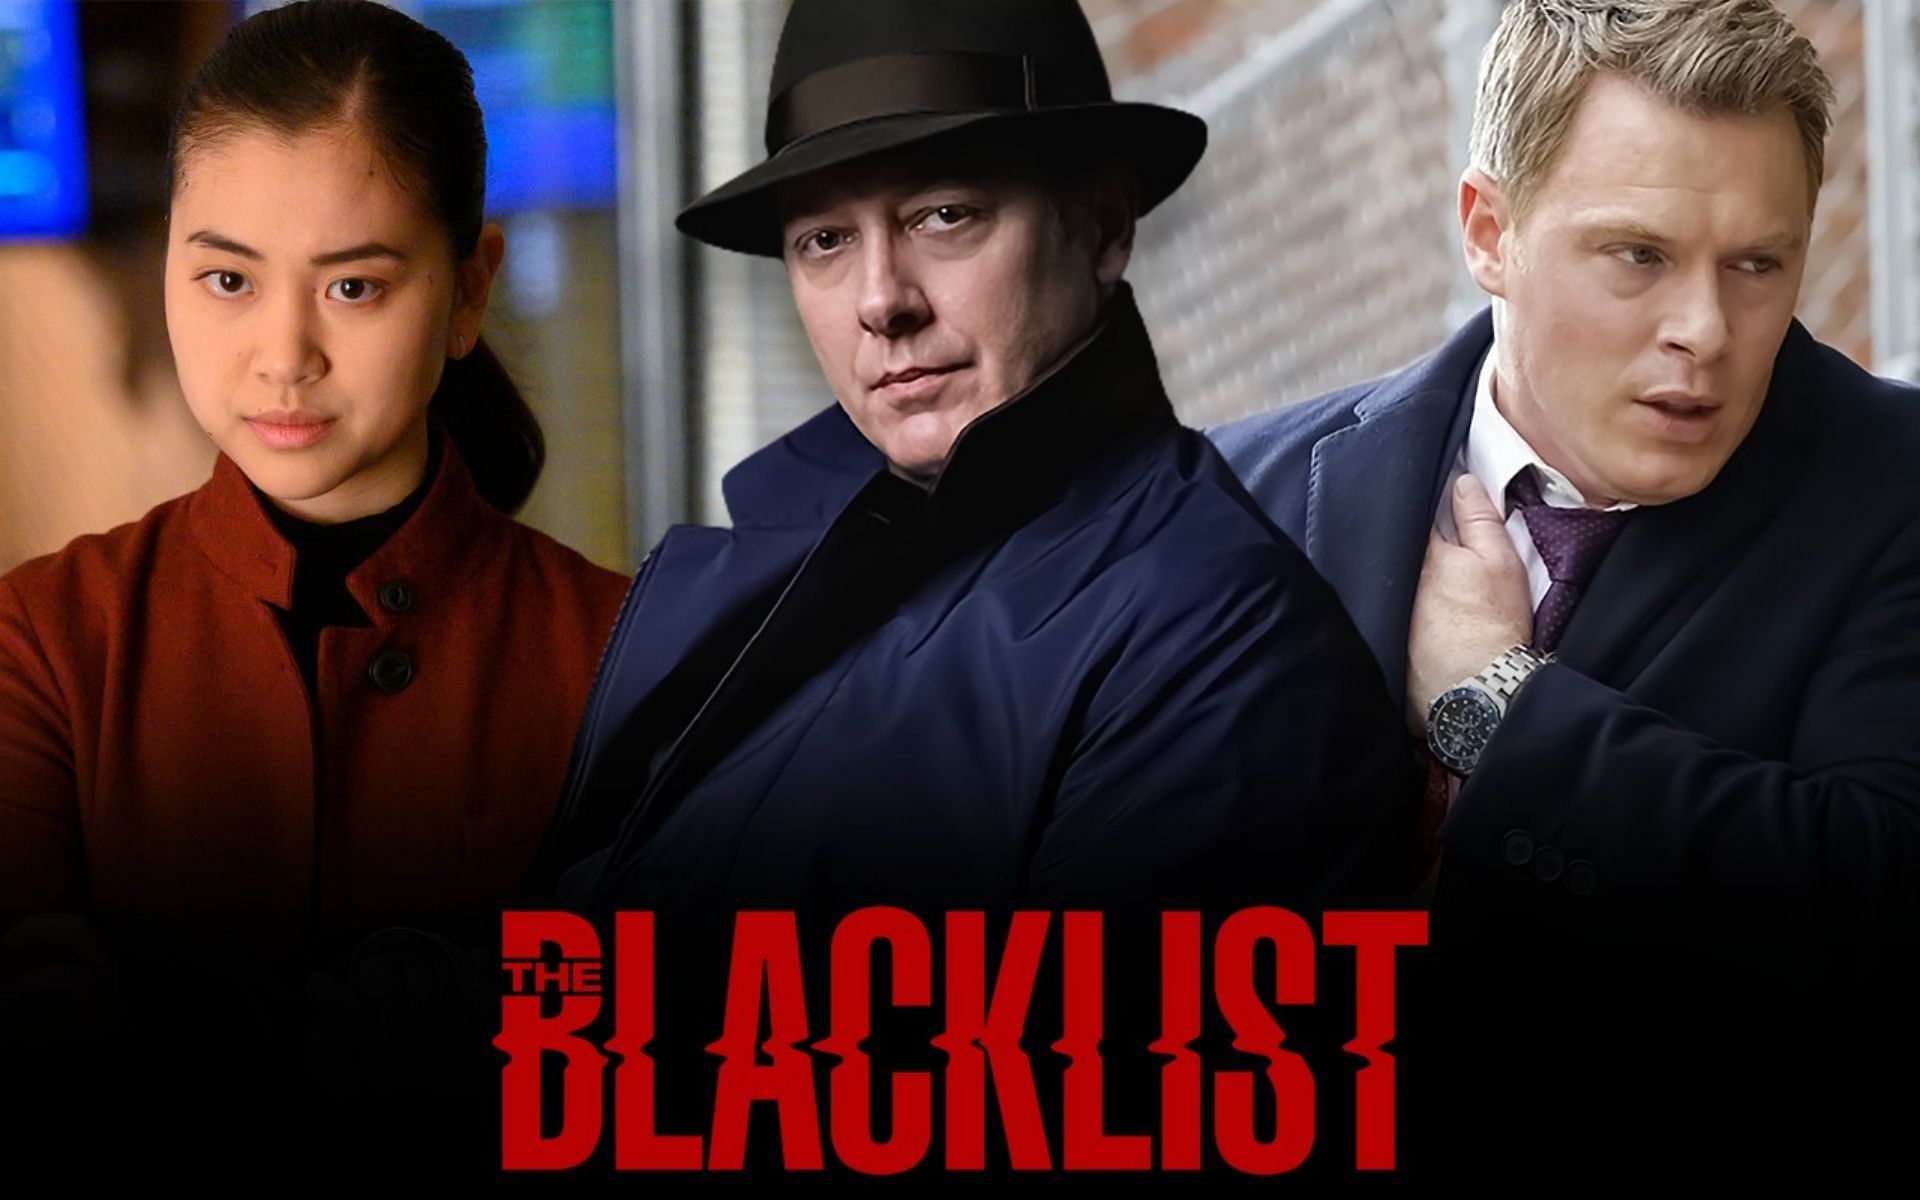 The Blacklist' Season 9 full cast list: James Spader and others star in NBC drama